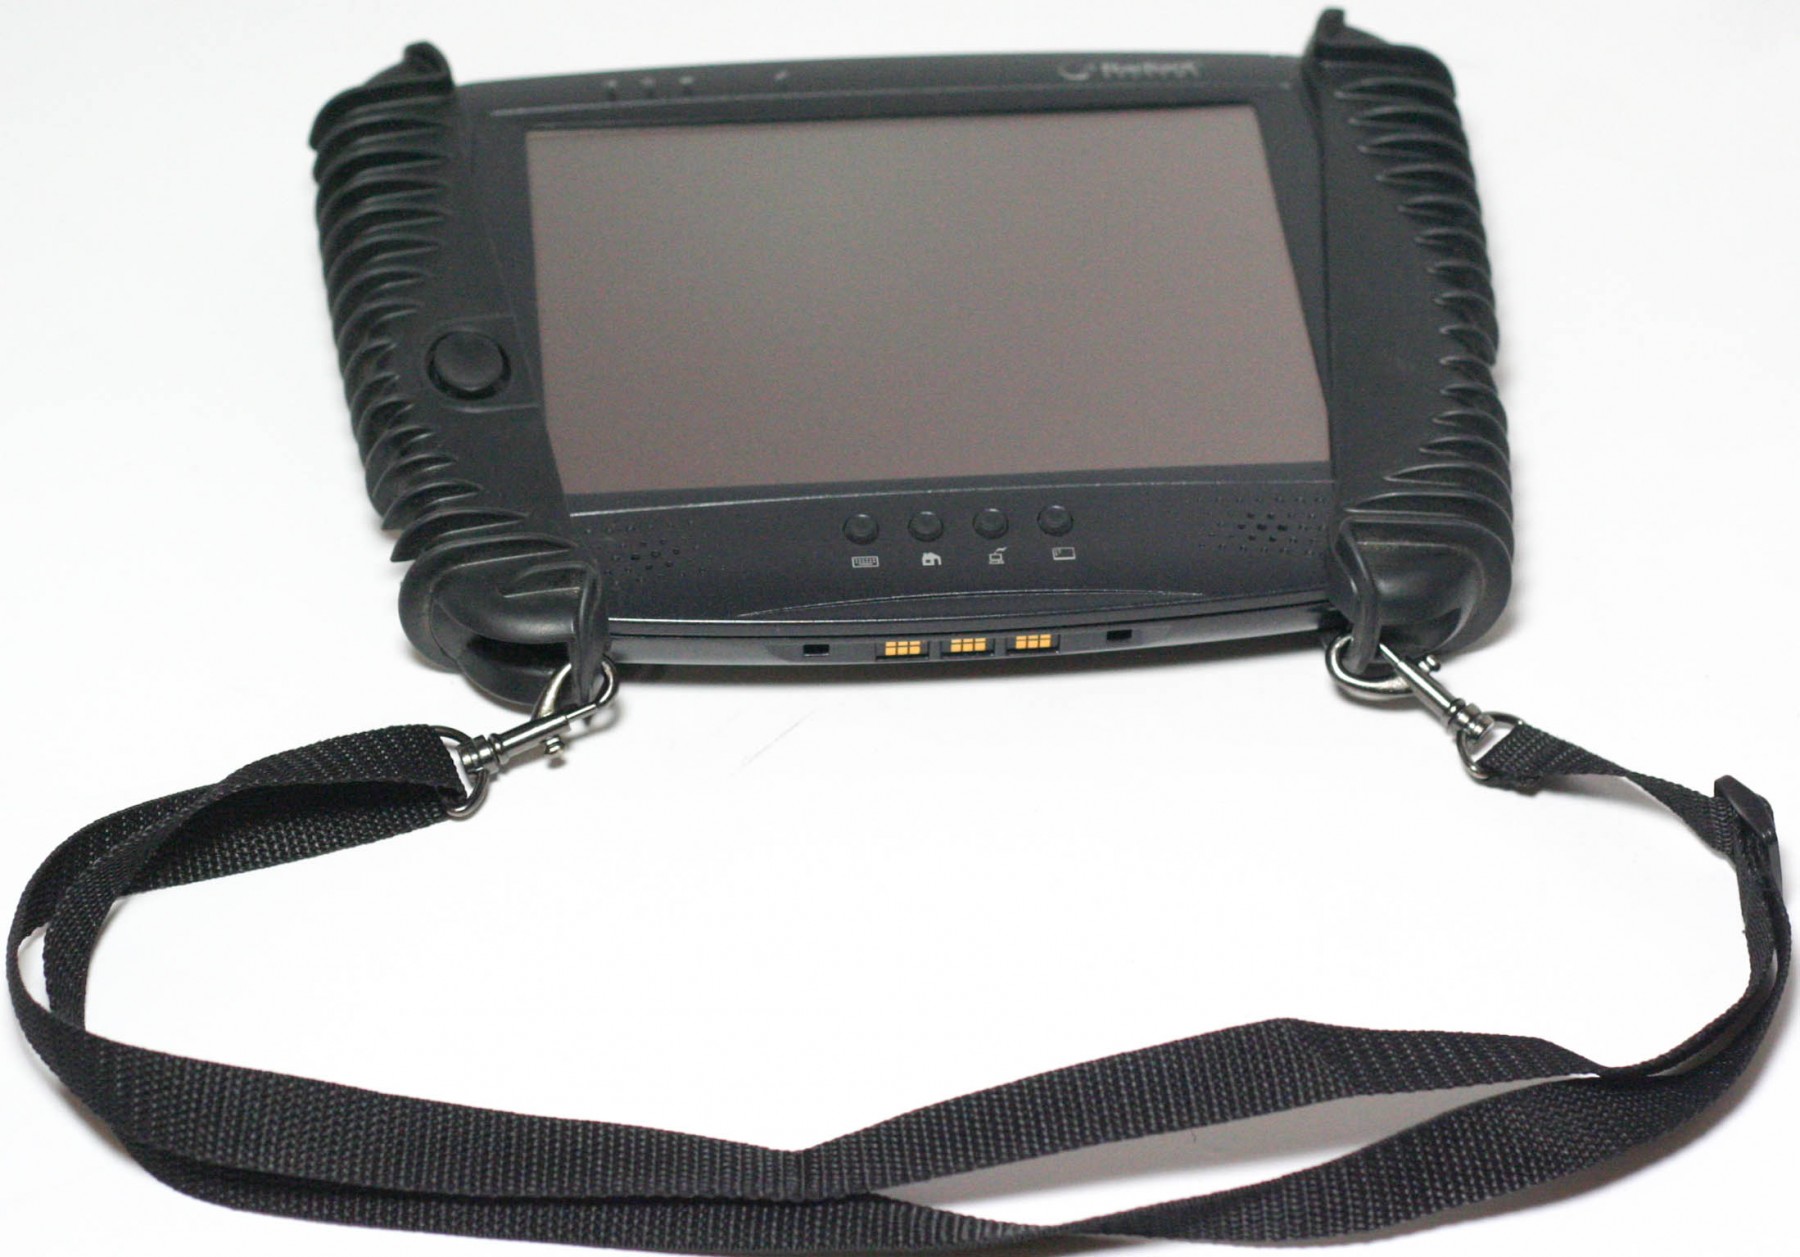 1000490-Radiant Systems DT368 POS Tablet -image